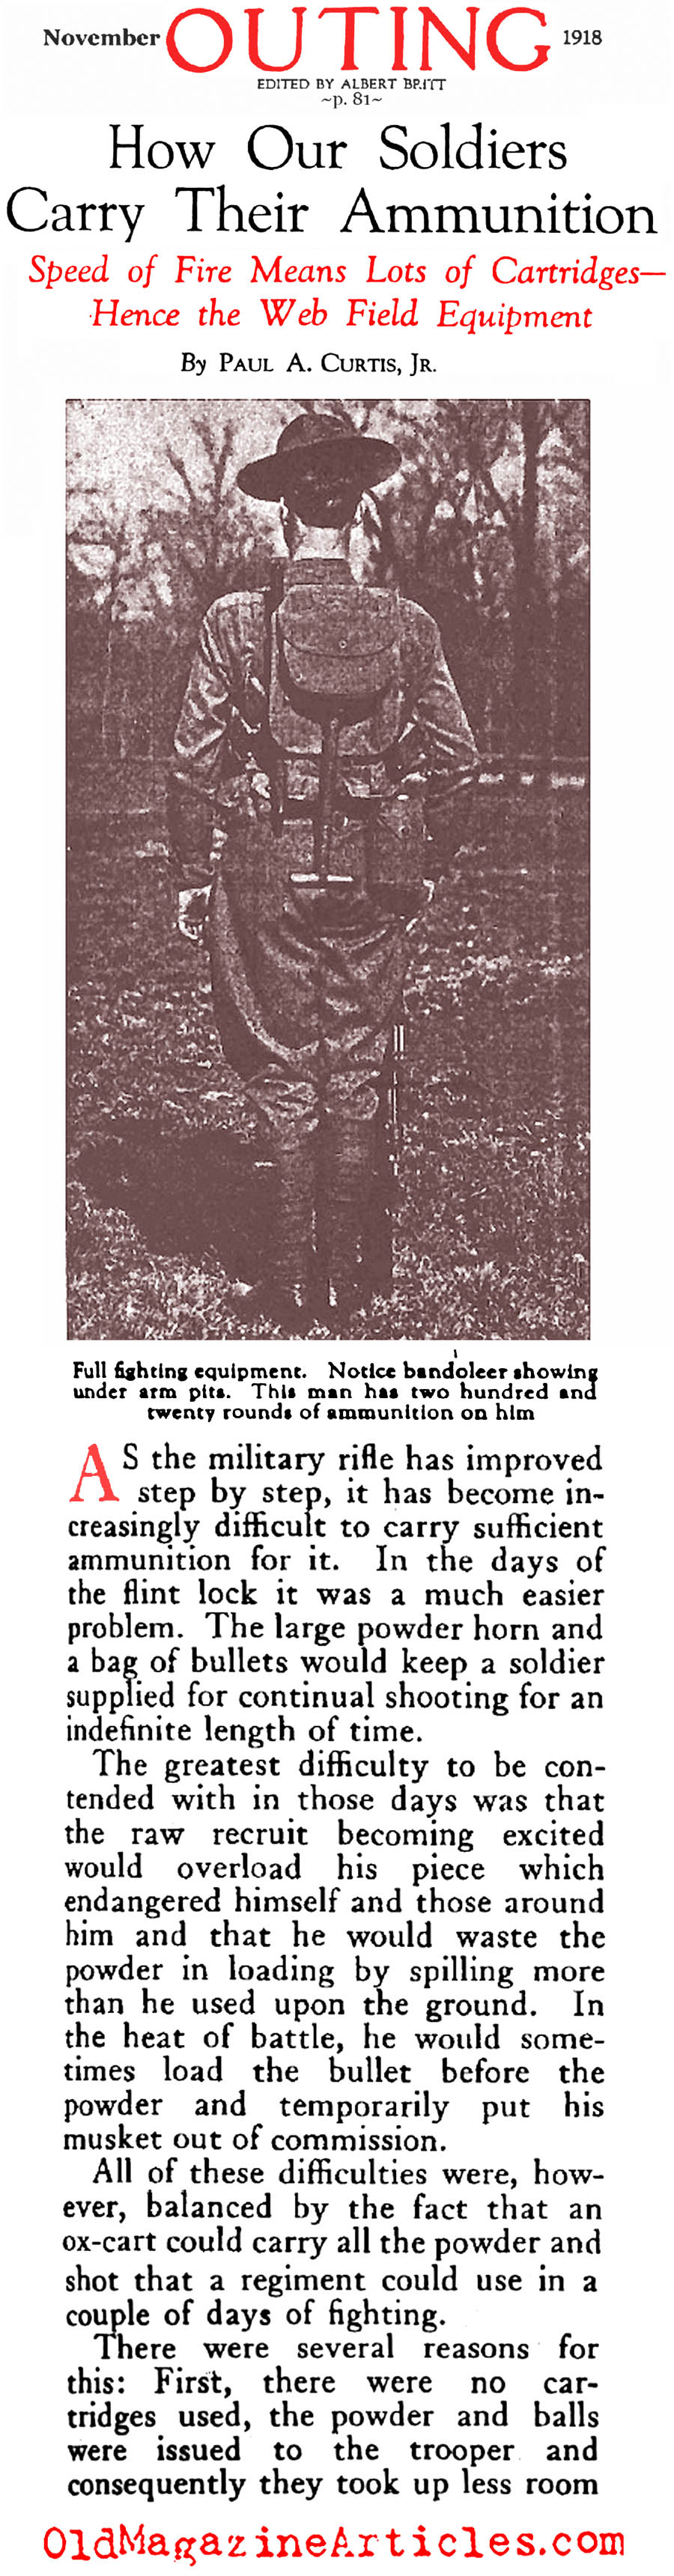 The Evolution of the U.S. Army Web Belt (Outing Magazine, 1918)